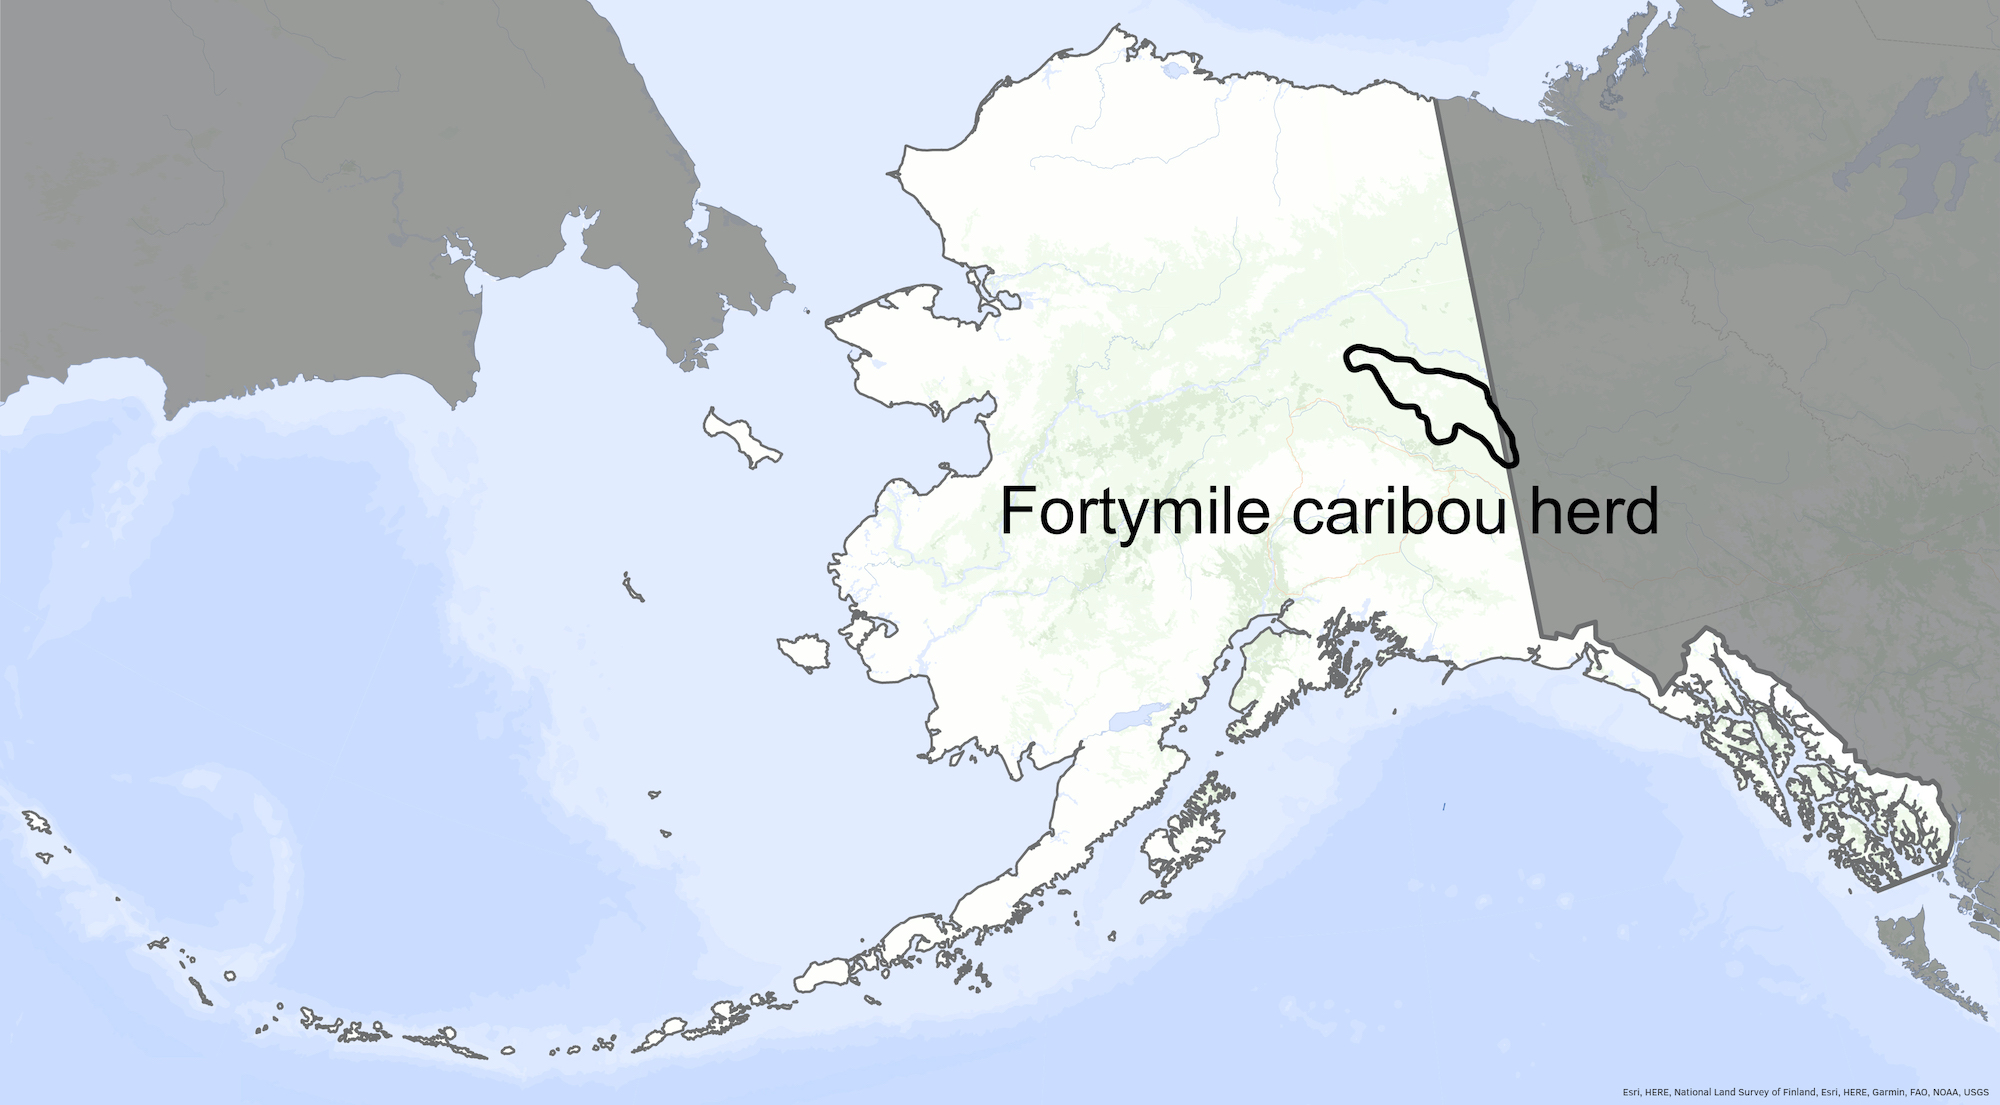 A black outline on a map shows the territory of the Fortymile caribou herd in eastern Alaska and western Canada.